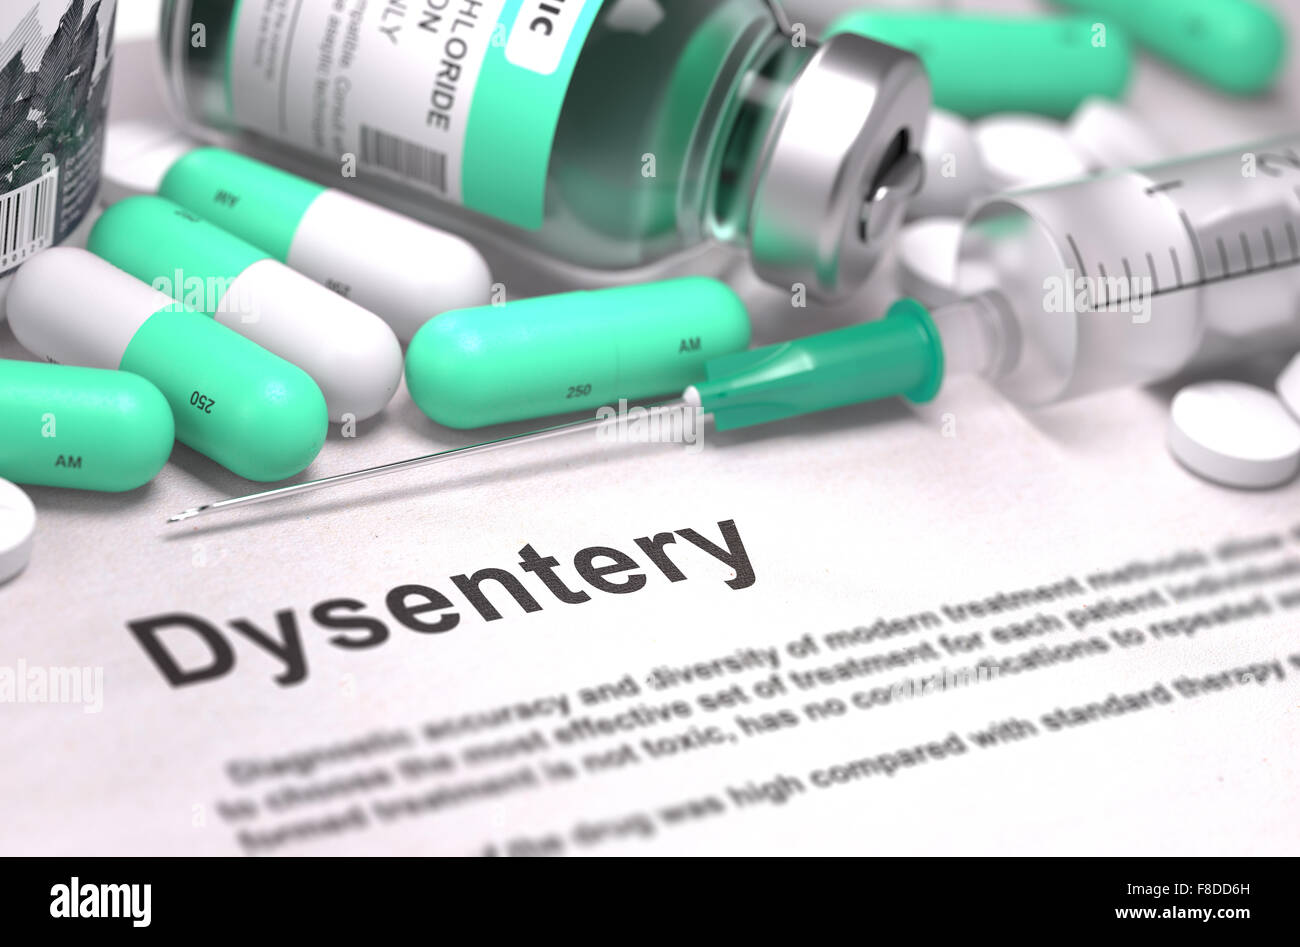 Diagnosis - Dysentery. Medical Concept with Blurred Background. Stock Photo